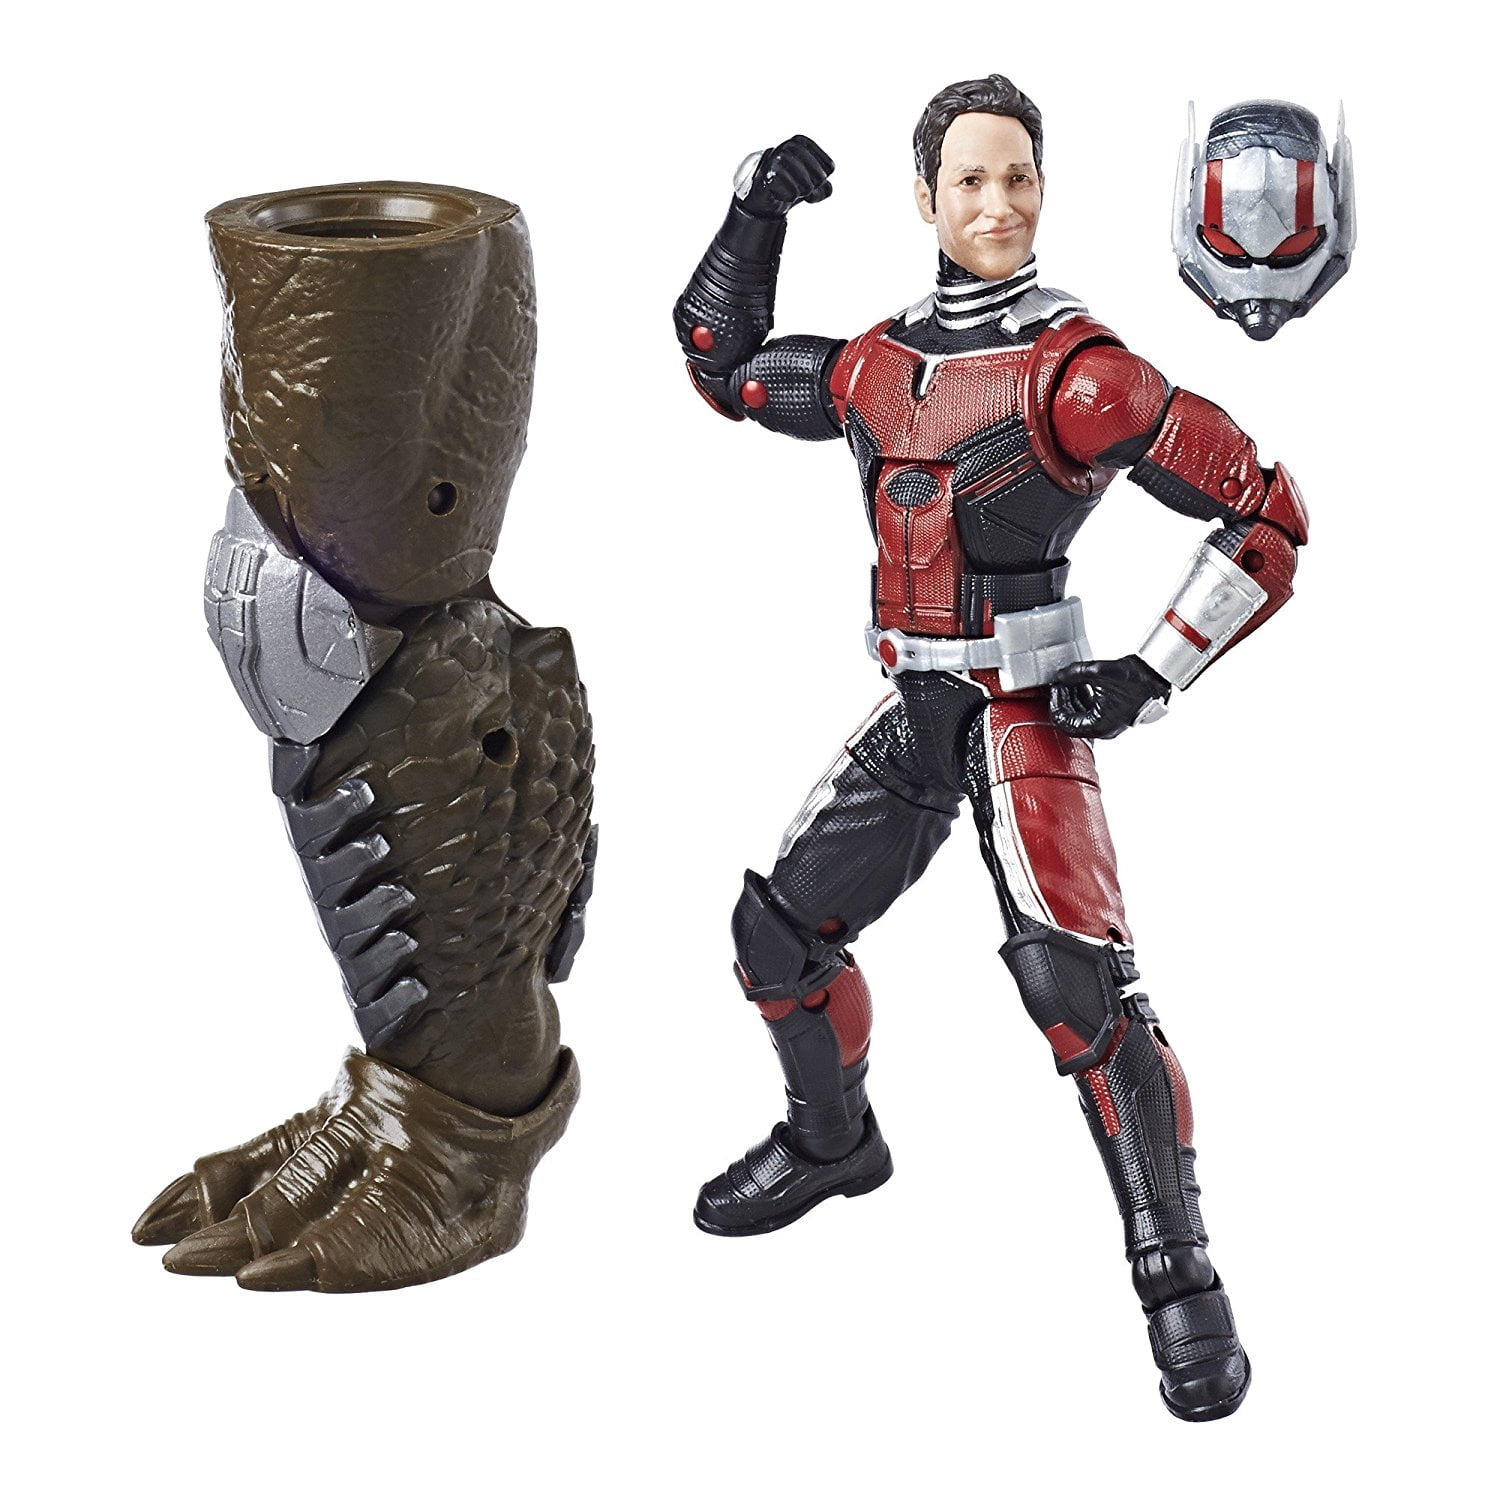 MARVEL LEGENDS ANT-MAN AND THE WASP ca.16 cm FIGURE HASBRO ANT-MAN 6" INCH 